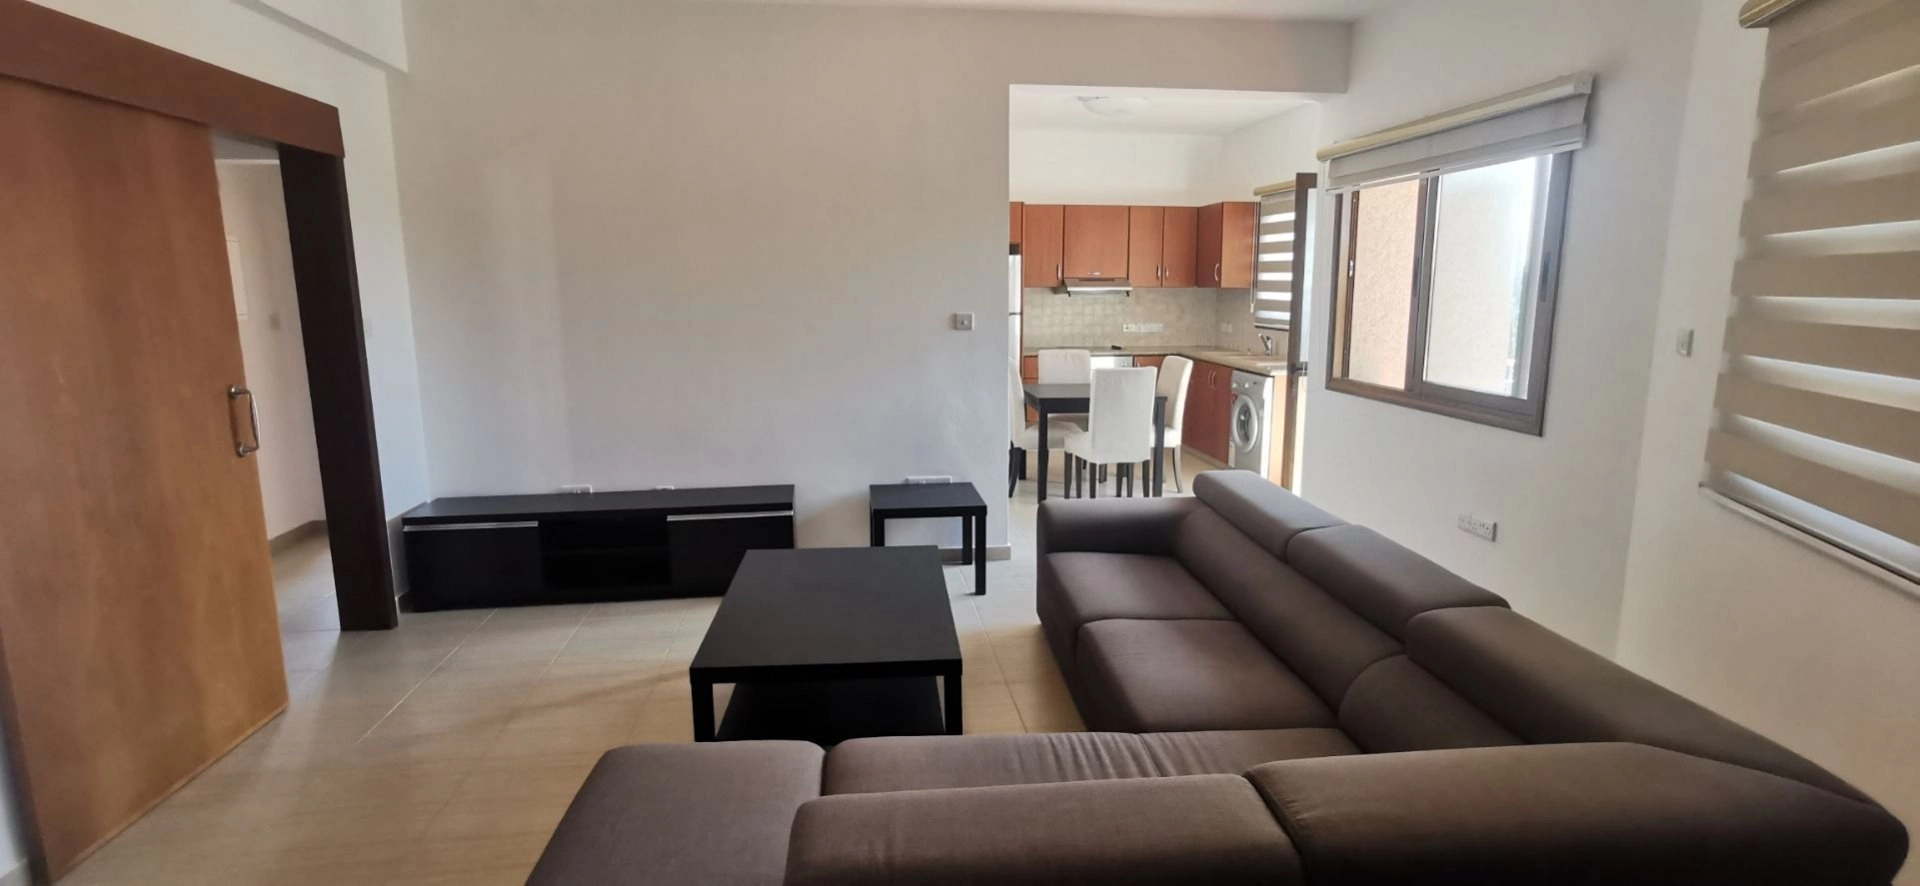 3 Bedroom Apartment for Rent in Kolossi, Limassol District